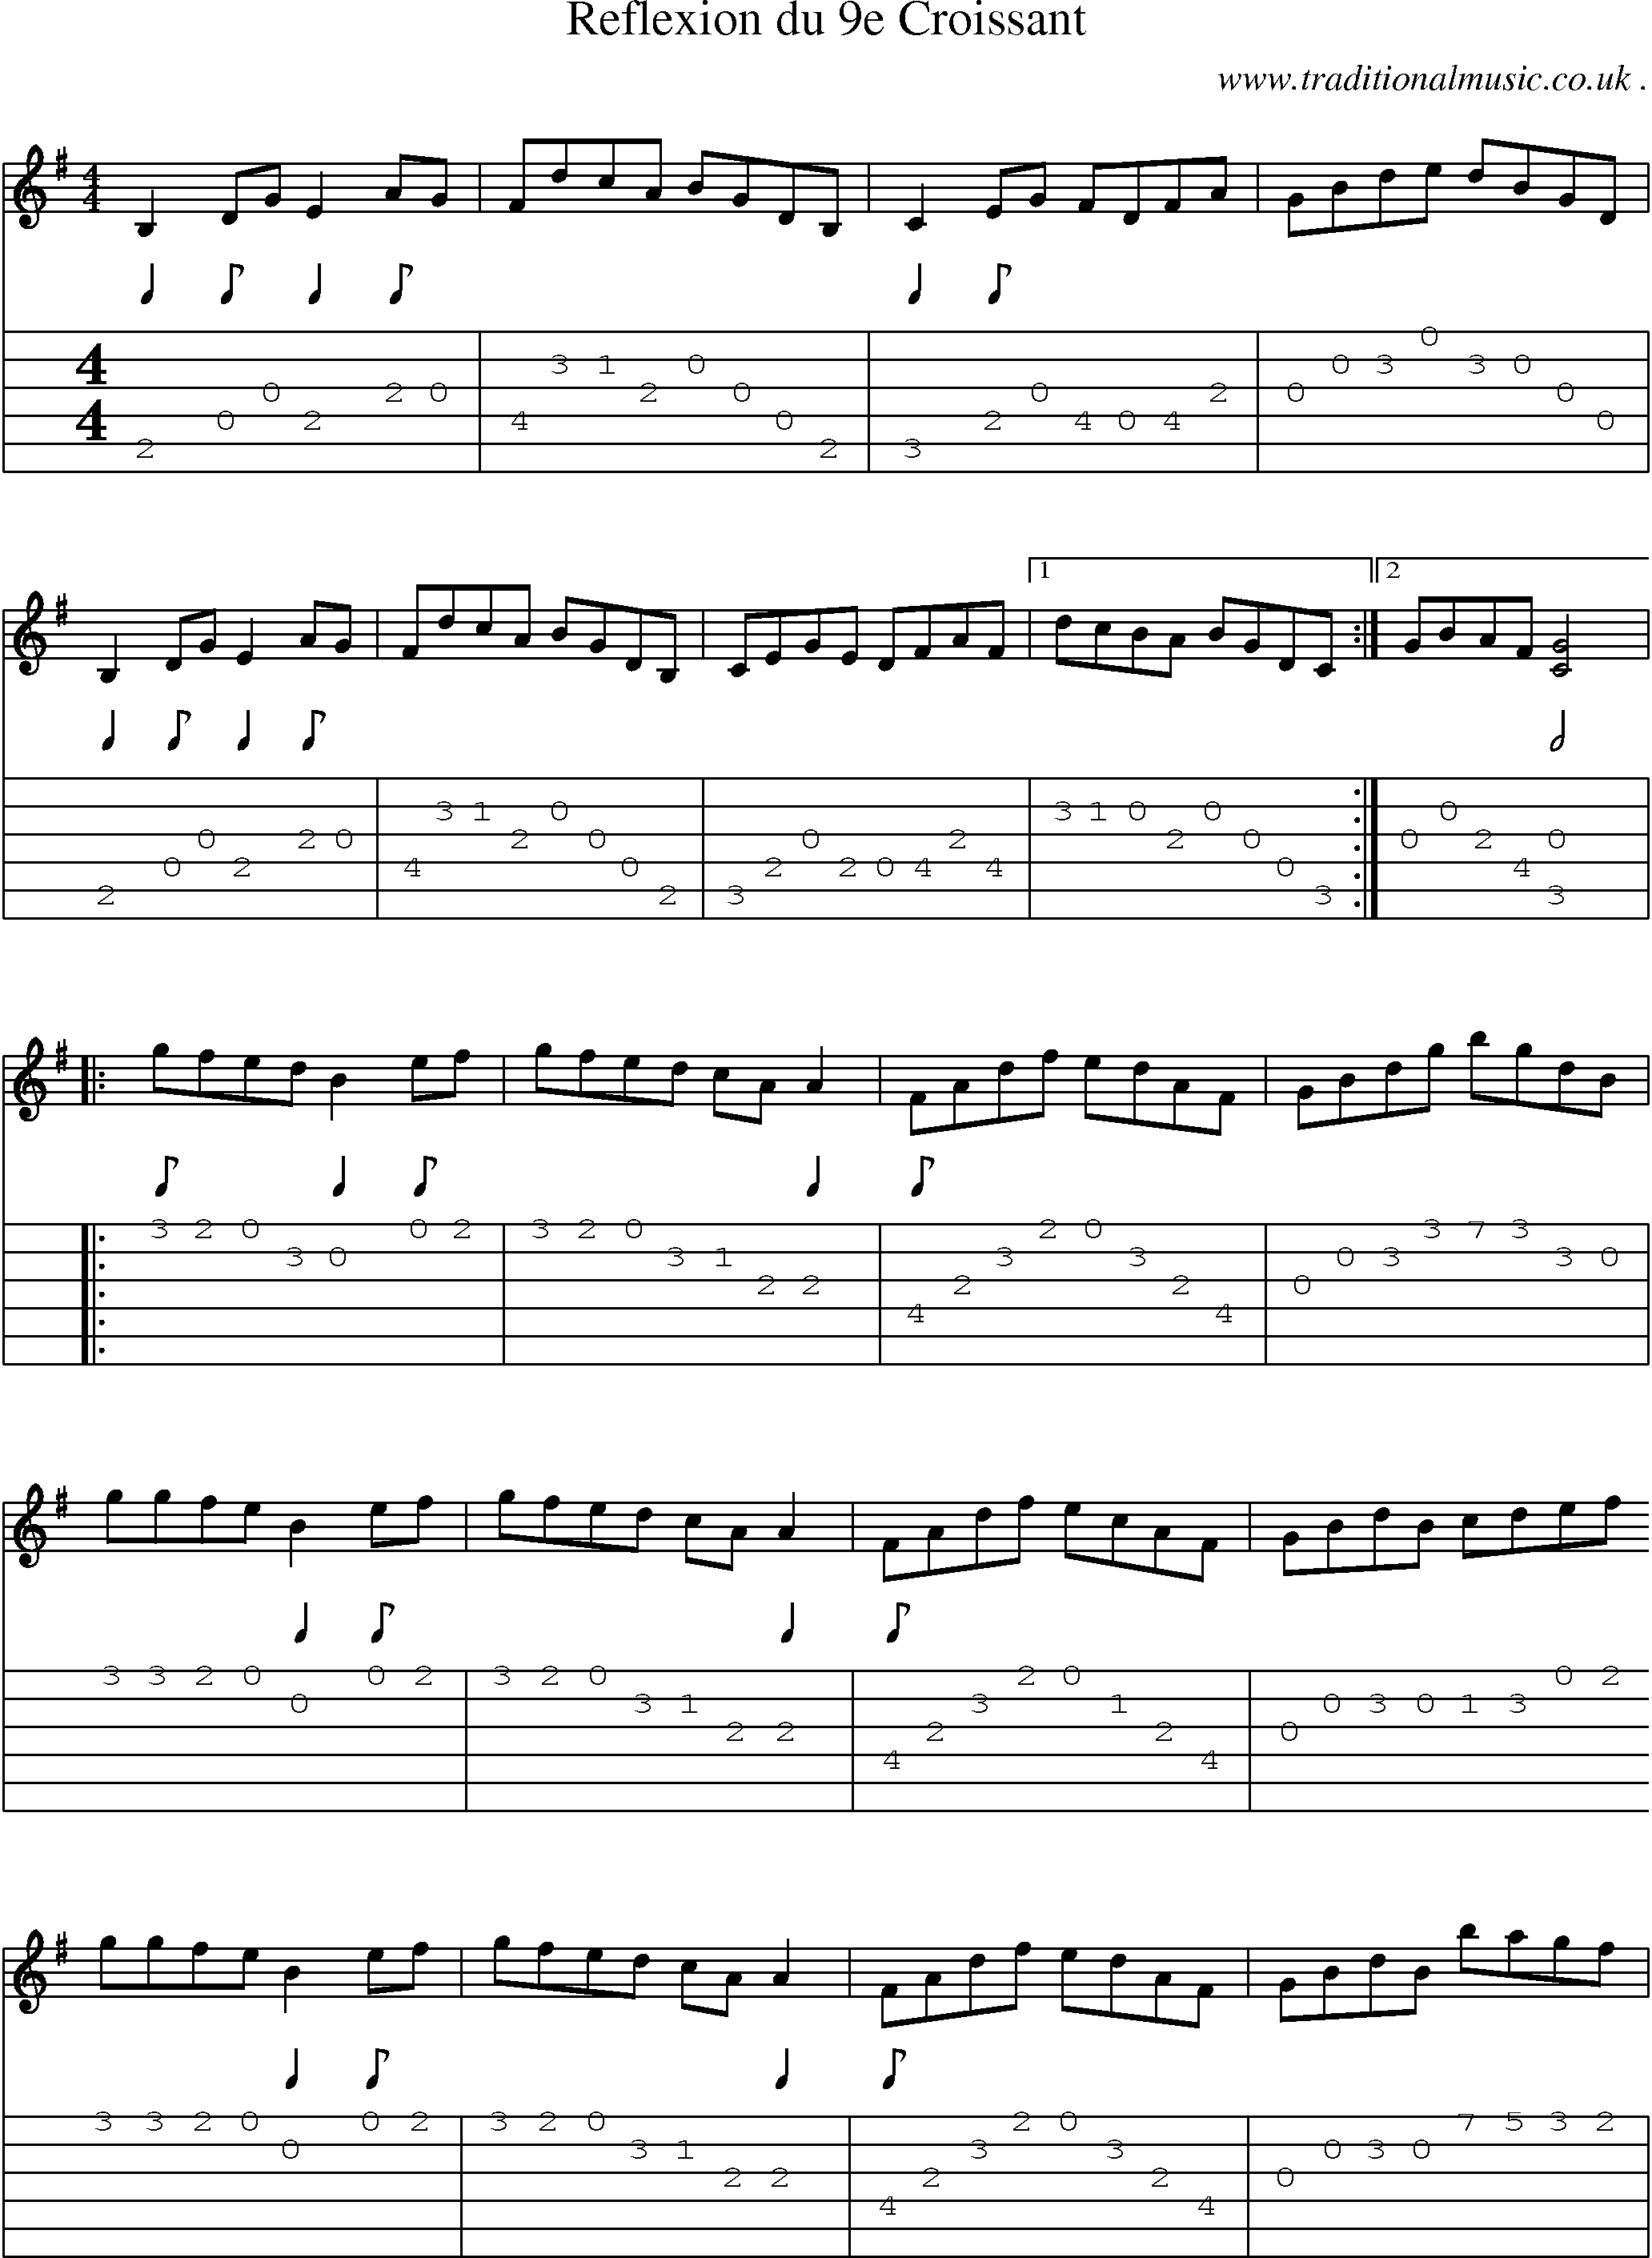 Sheet-Music and Guitar Tabs for Reflexion Du 9e Croissant